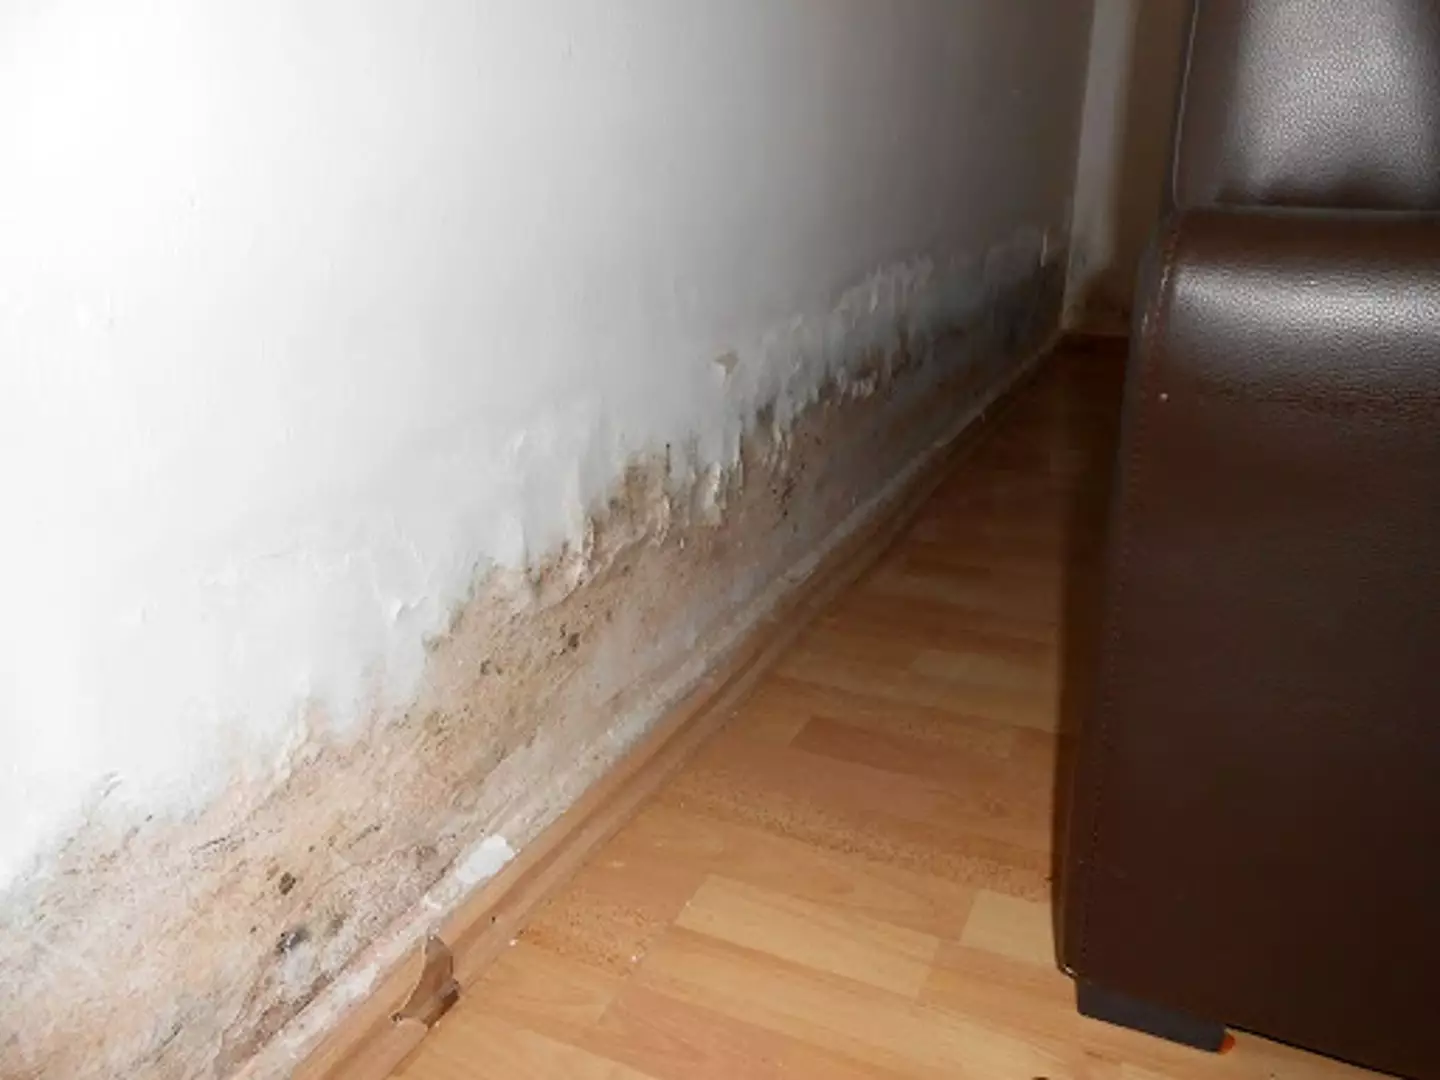 Mould can pose a risk to your health if left untreated.